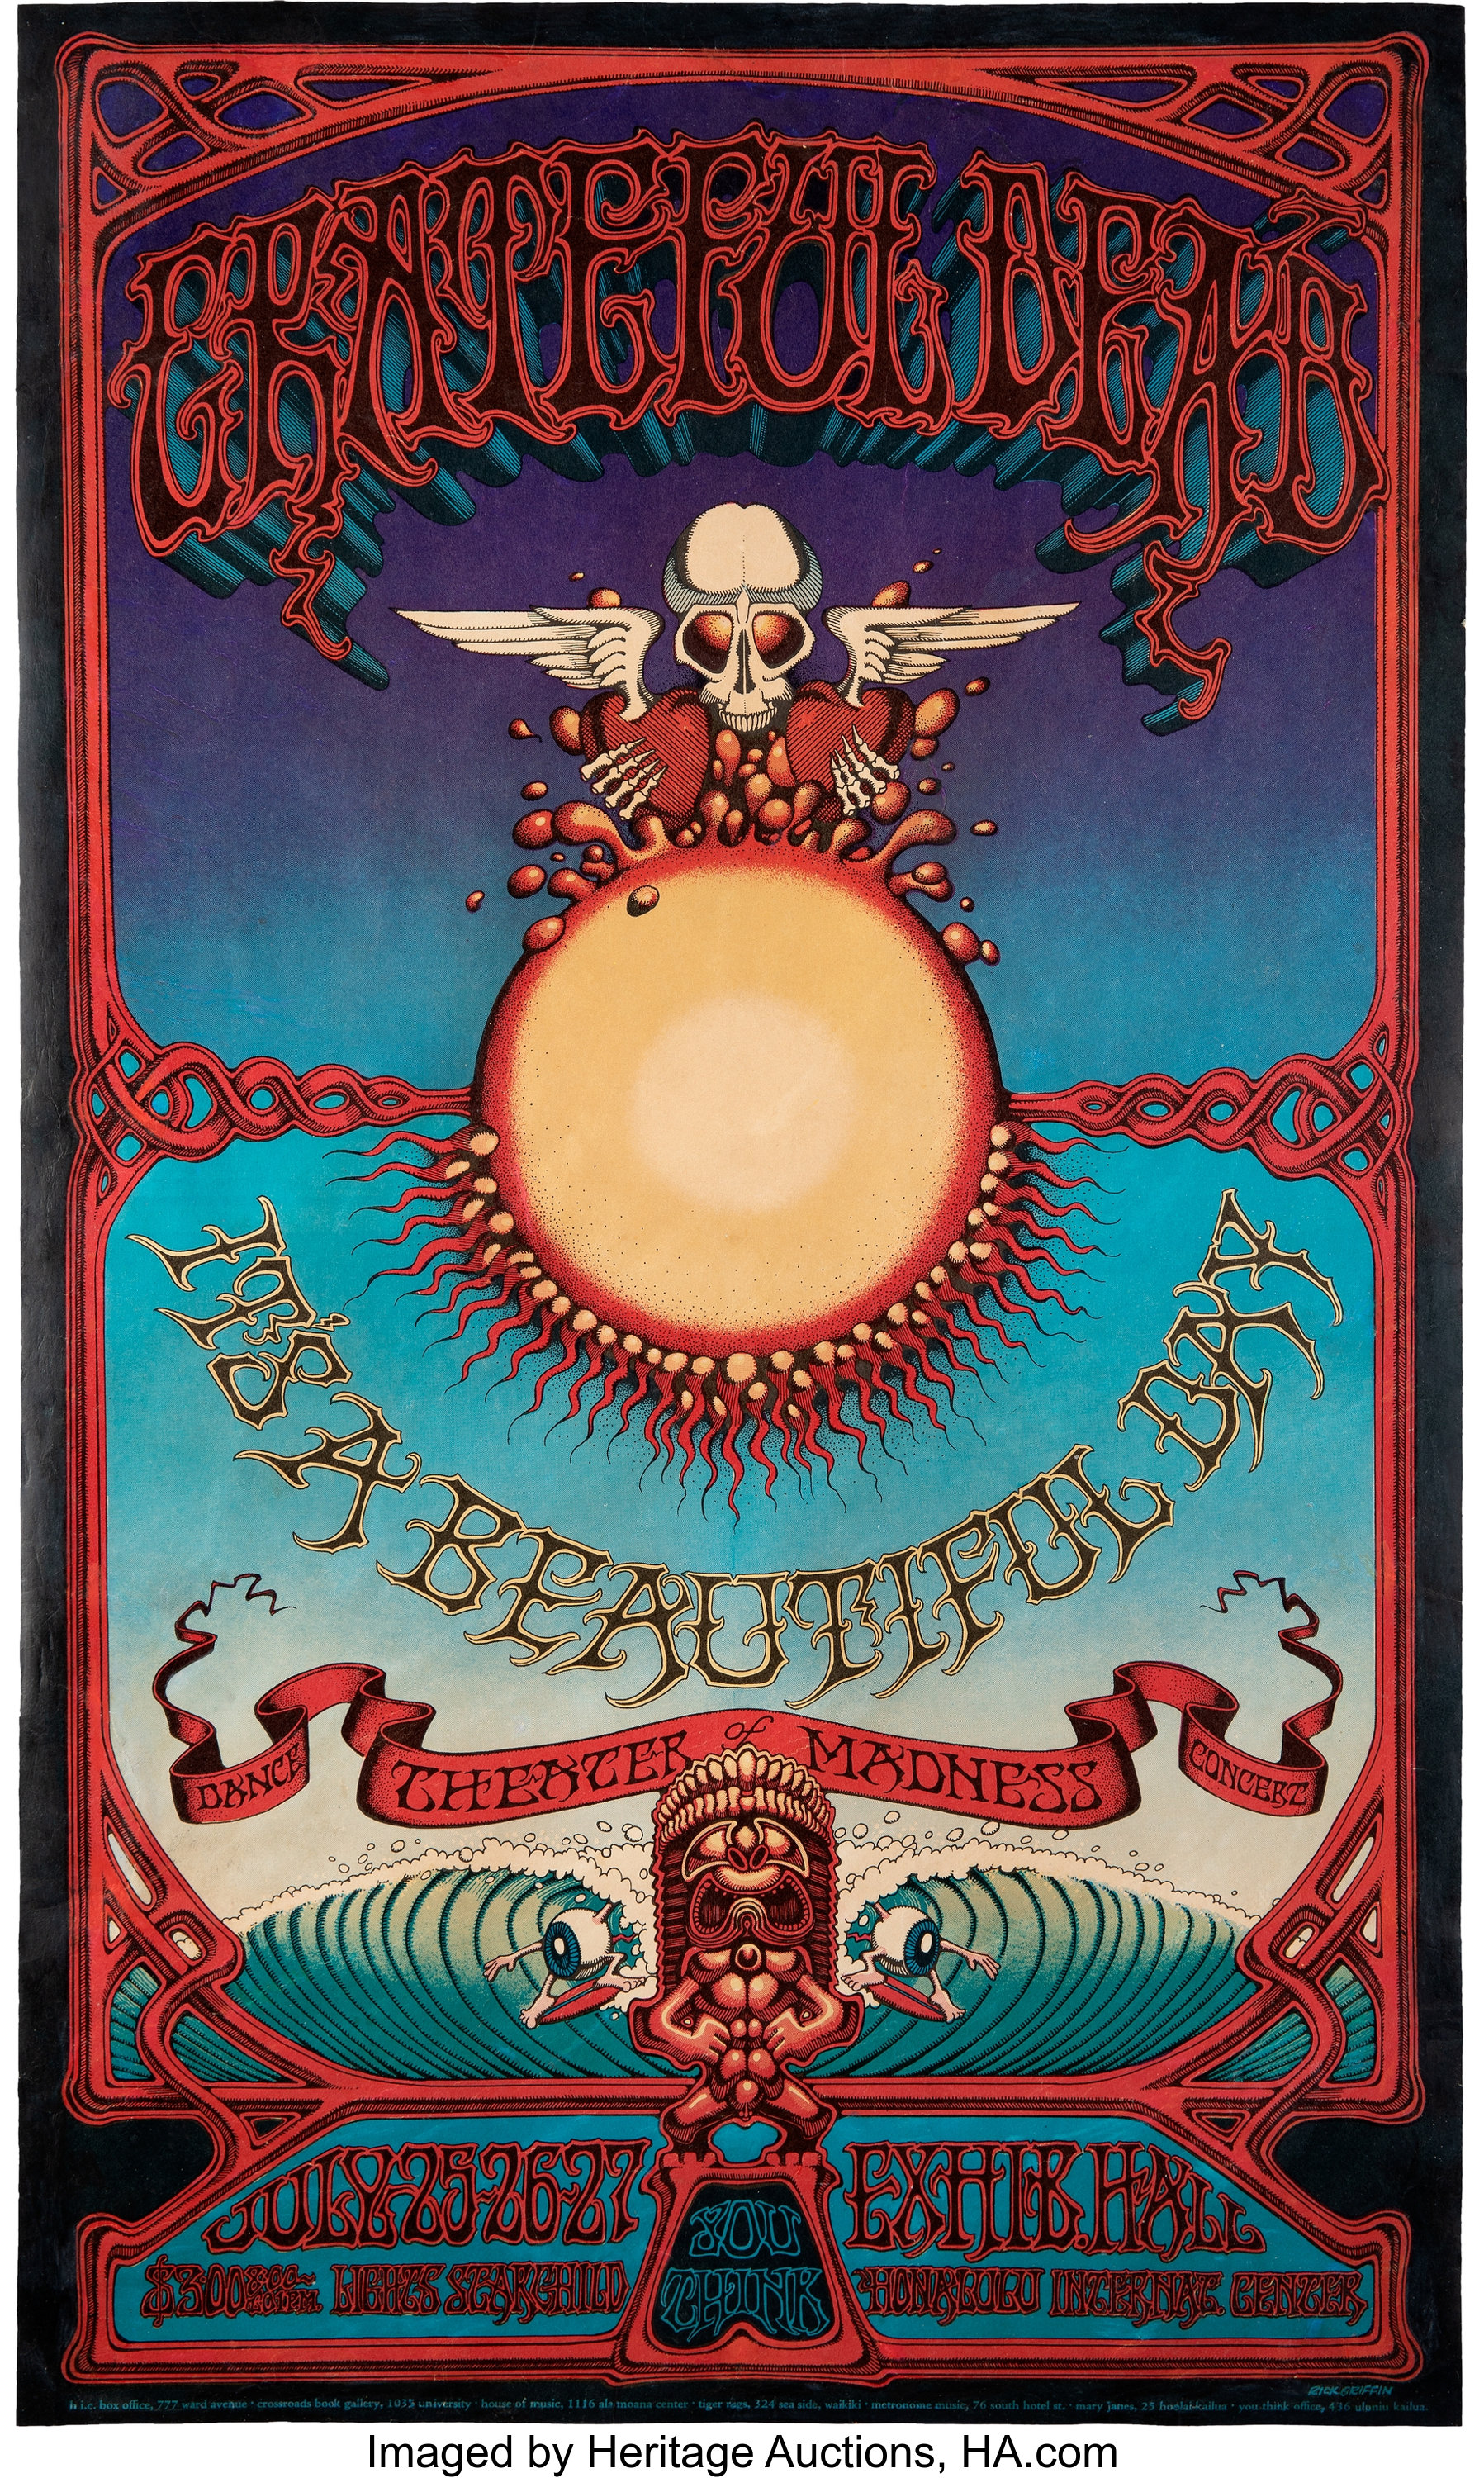 Grateful Dead 1969 Hawaiian Aoxomoxoa Concert Poster by Rick | Lot #89168 |  Heritage Auctions